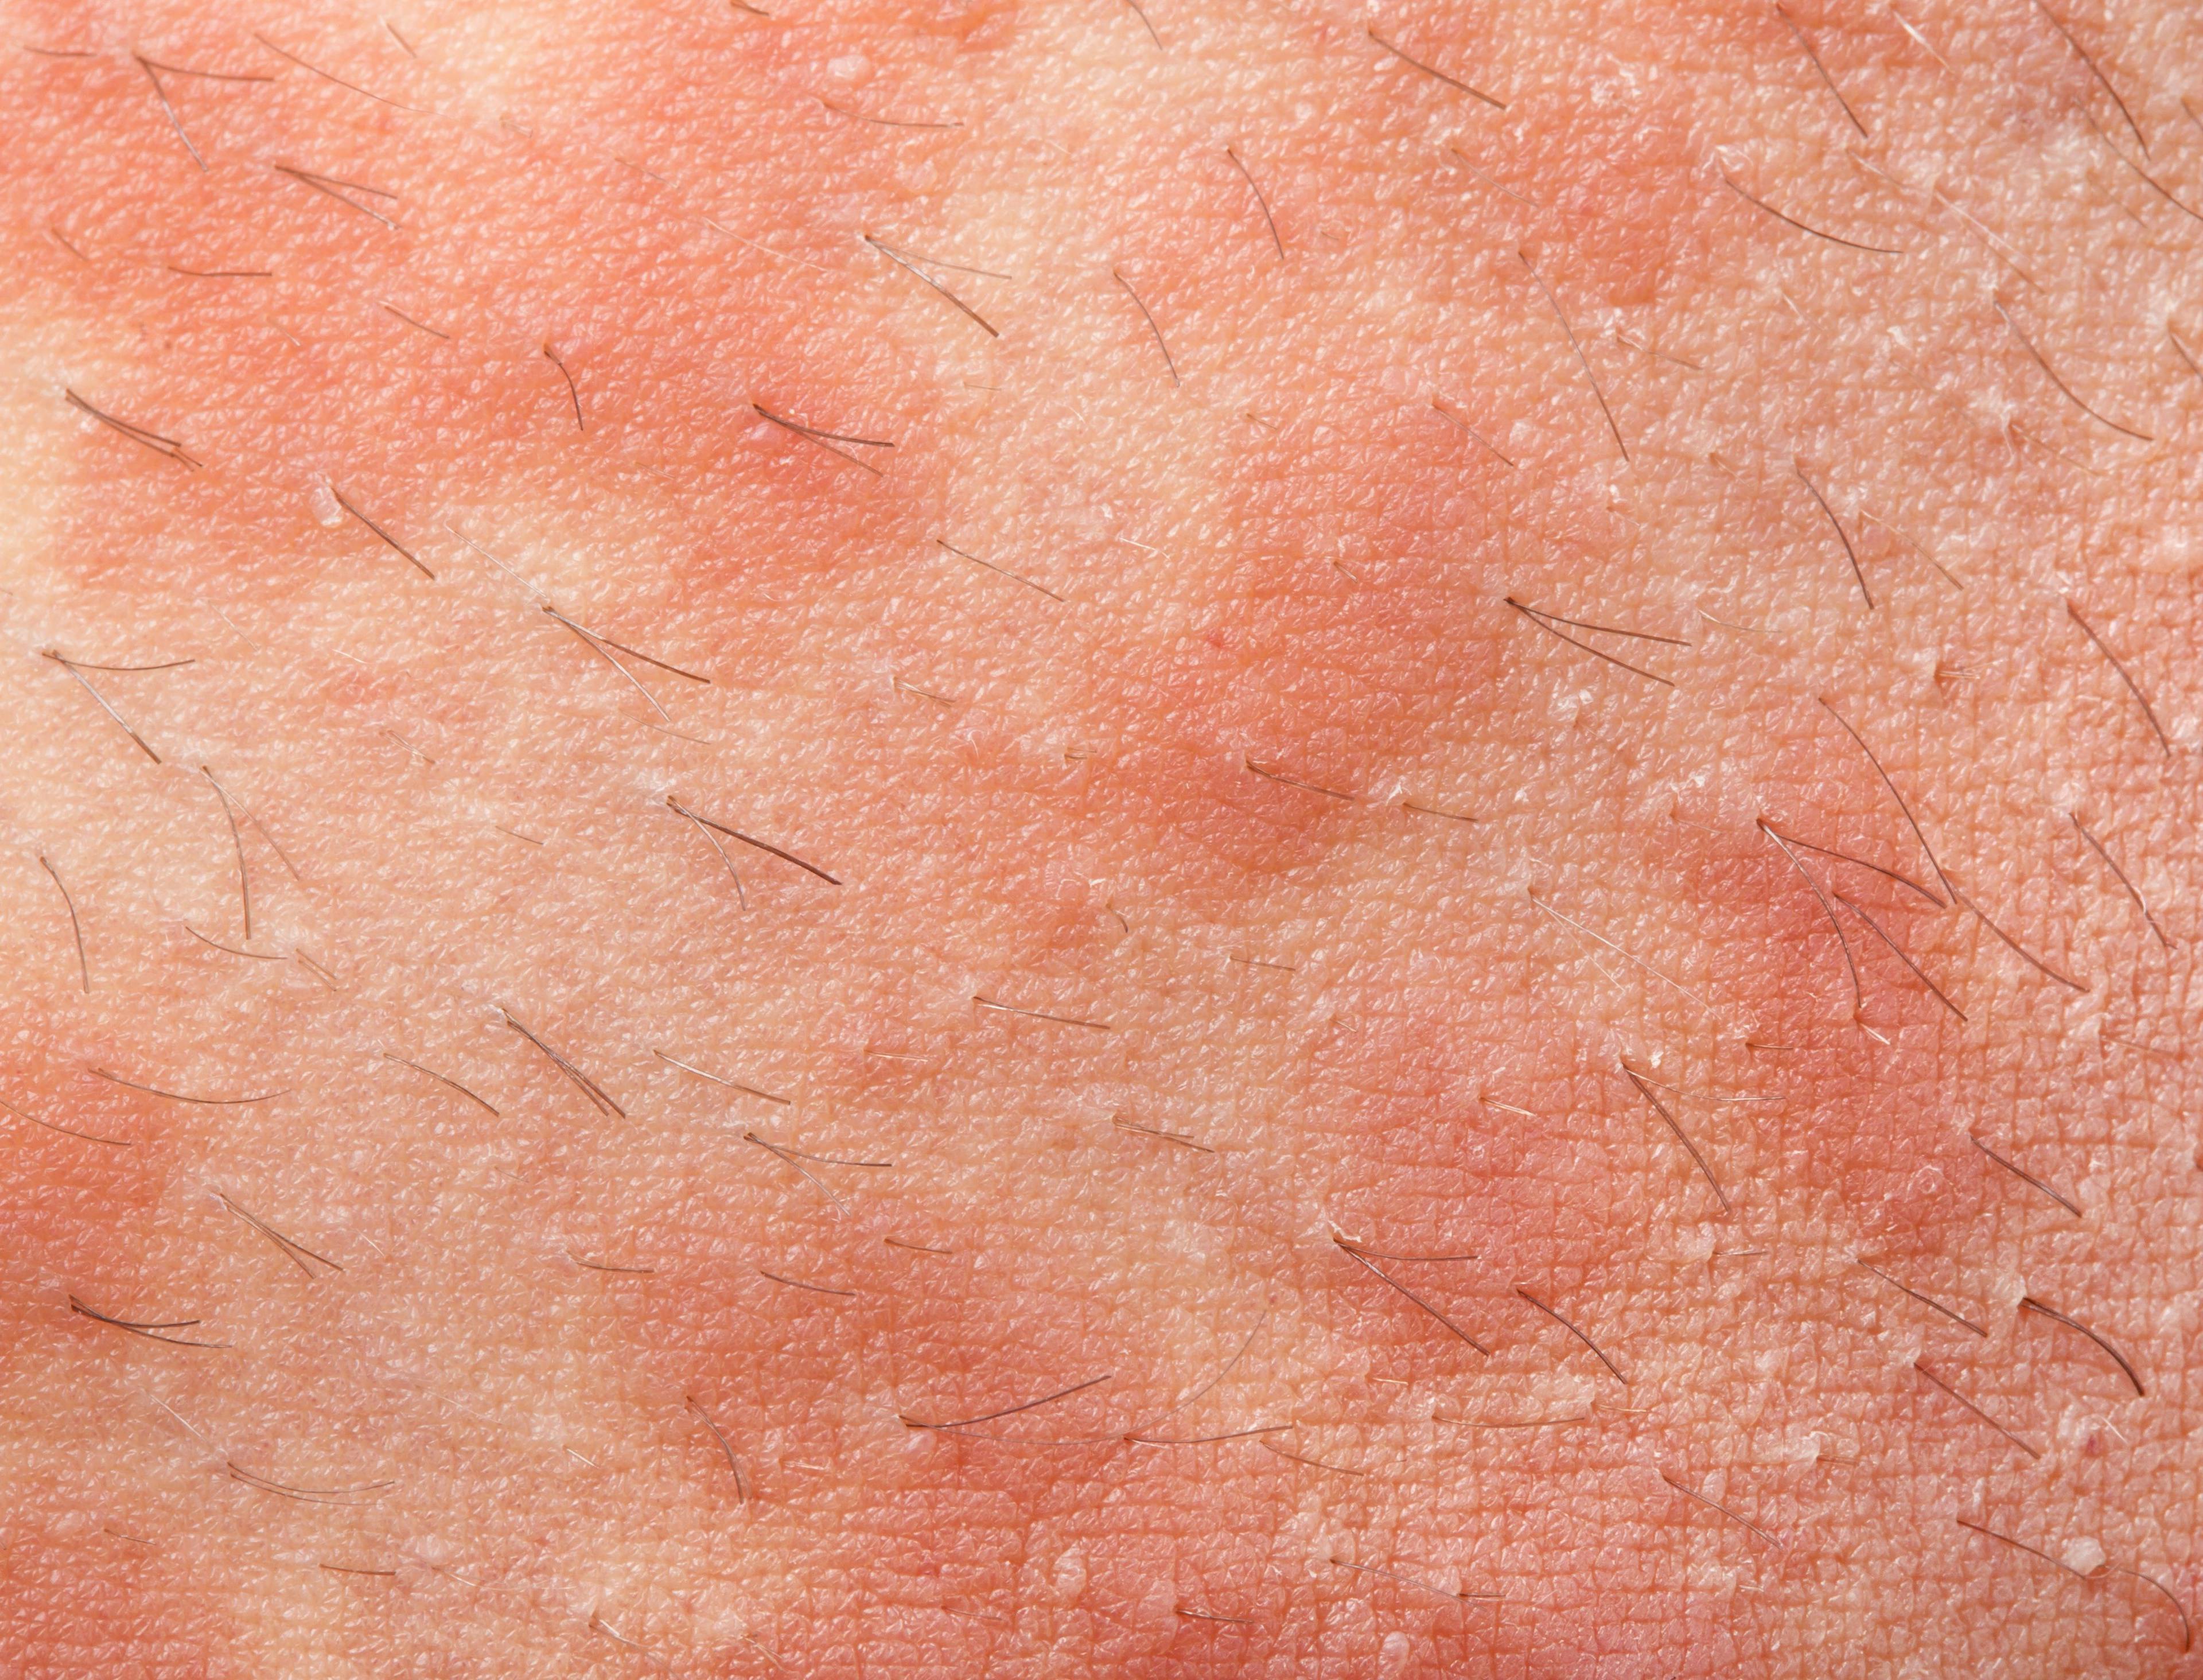 Tralokinumab with TCS Effective in Patients with Severe Atopic Dermatitis